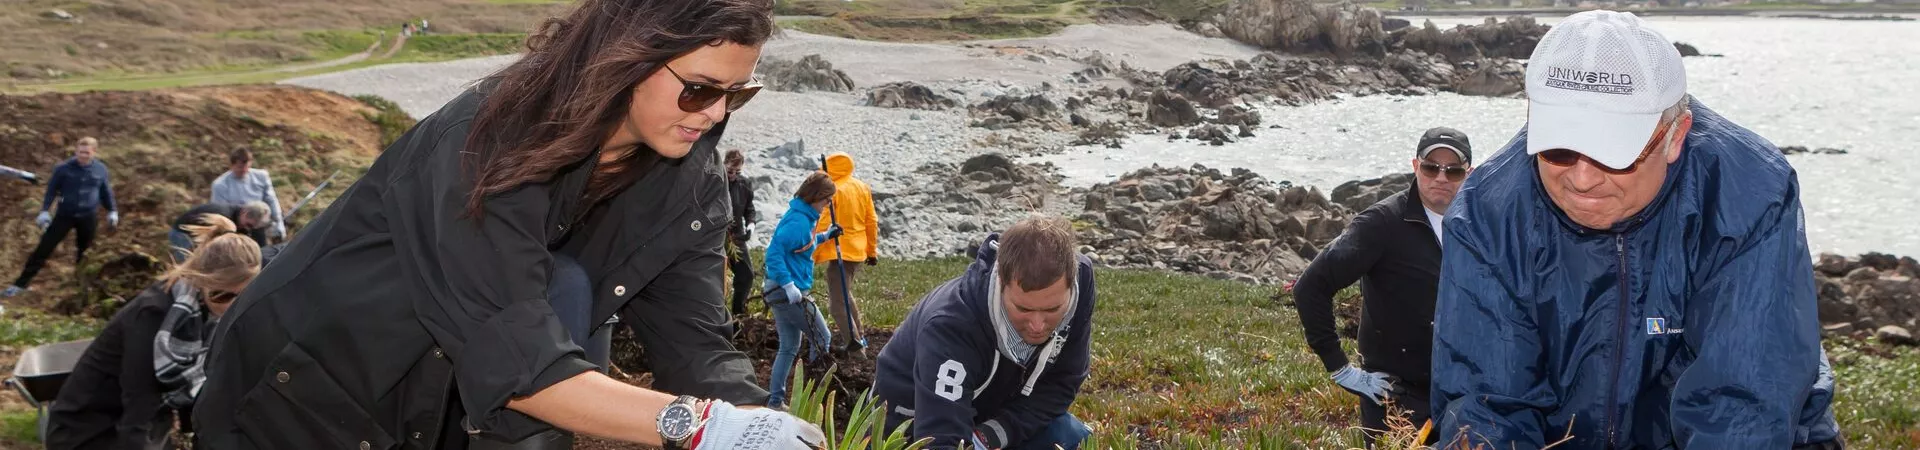 Shannon, Chief Sustainability Officer, planting with a group of people by the sea